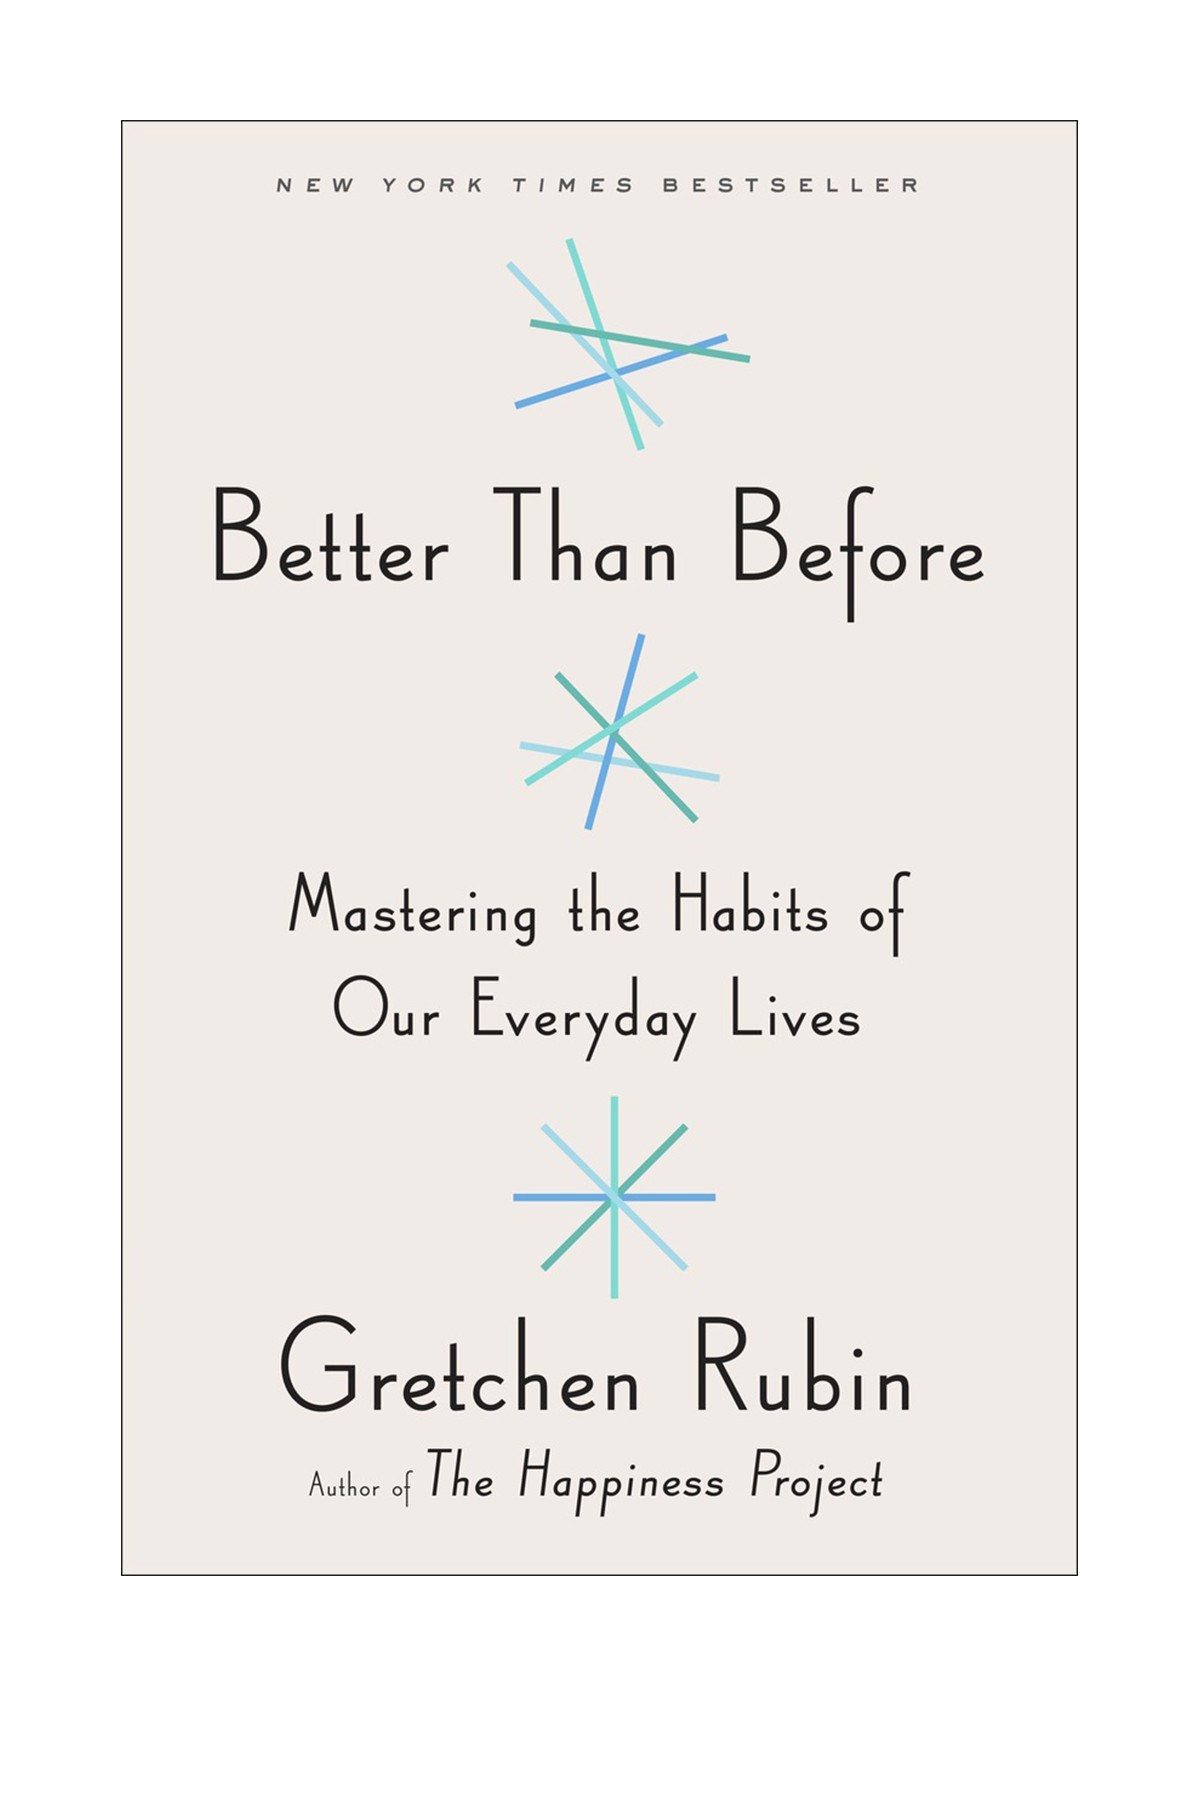 Better than before: Mastering the habits of our everyday lives